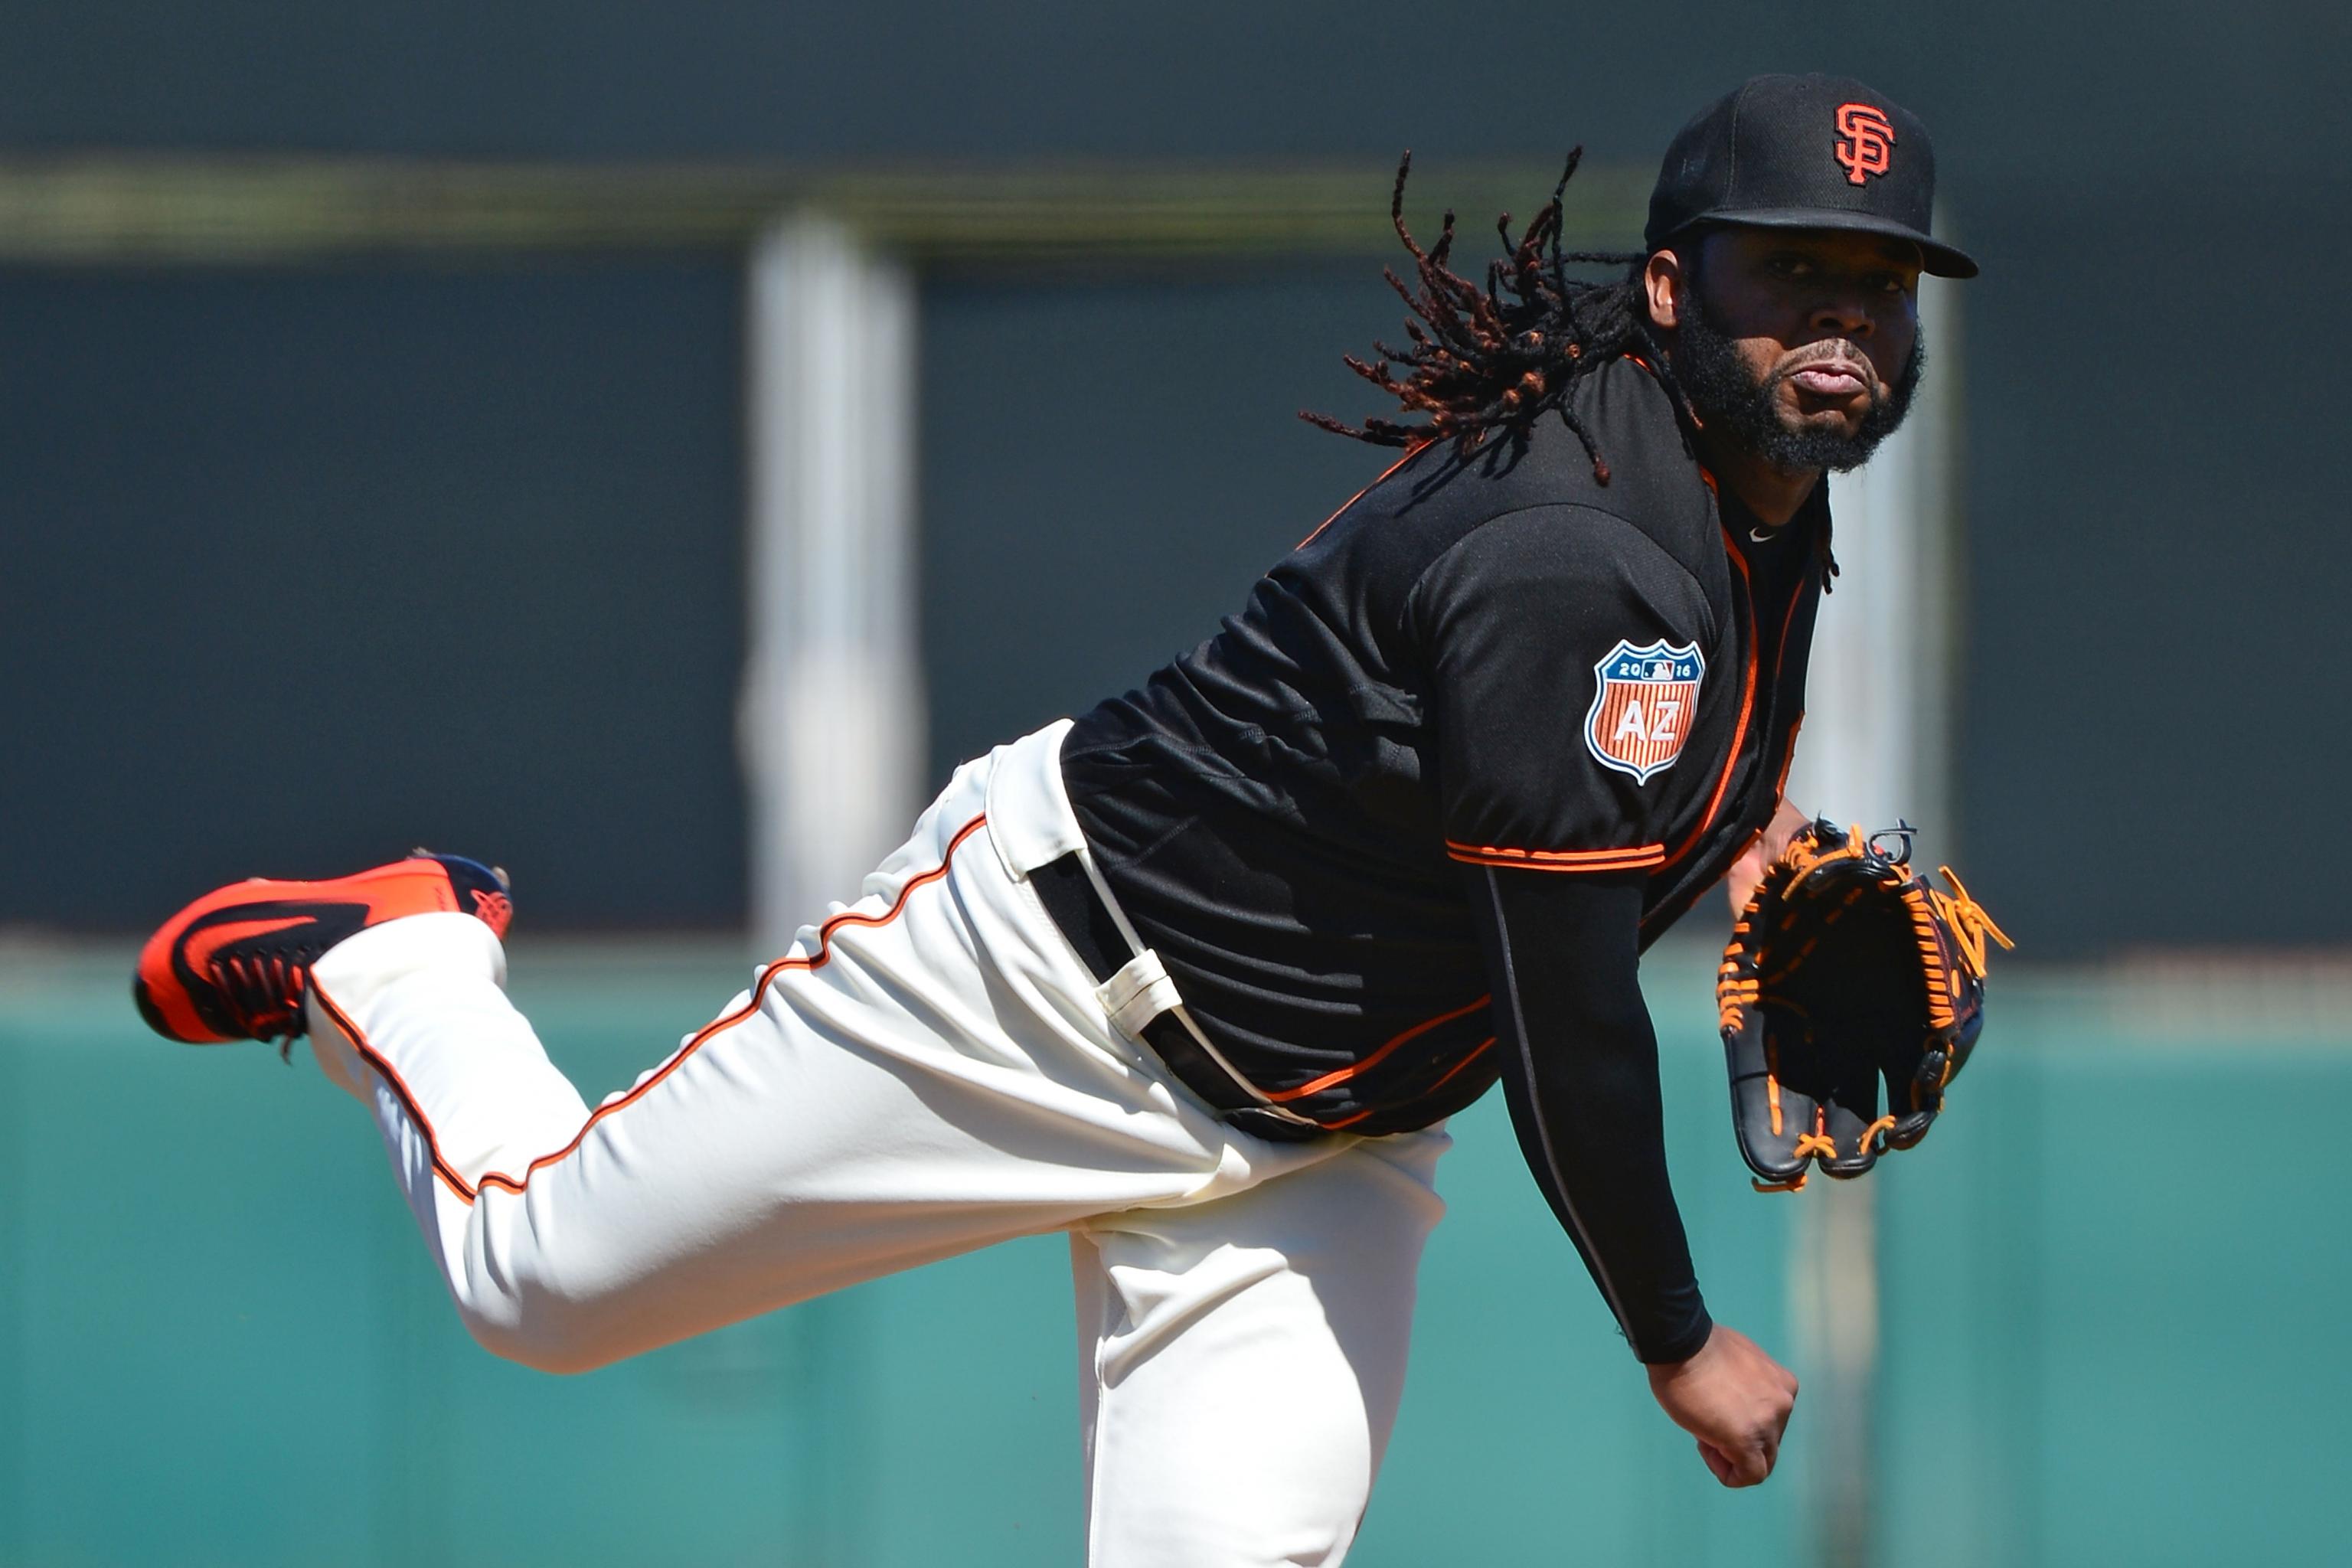 Chicago's Johnny Cueto, Giants' Carlos Rodón see, but don't face